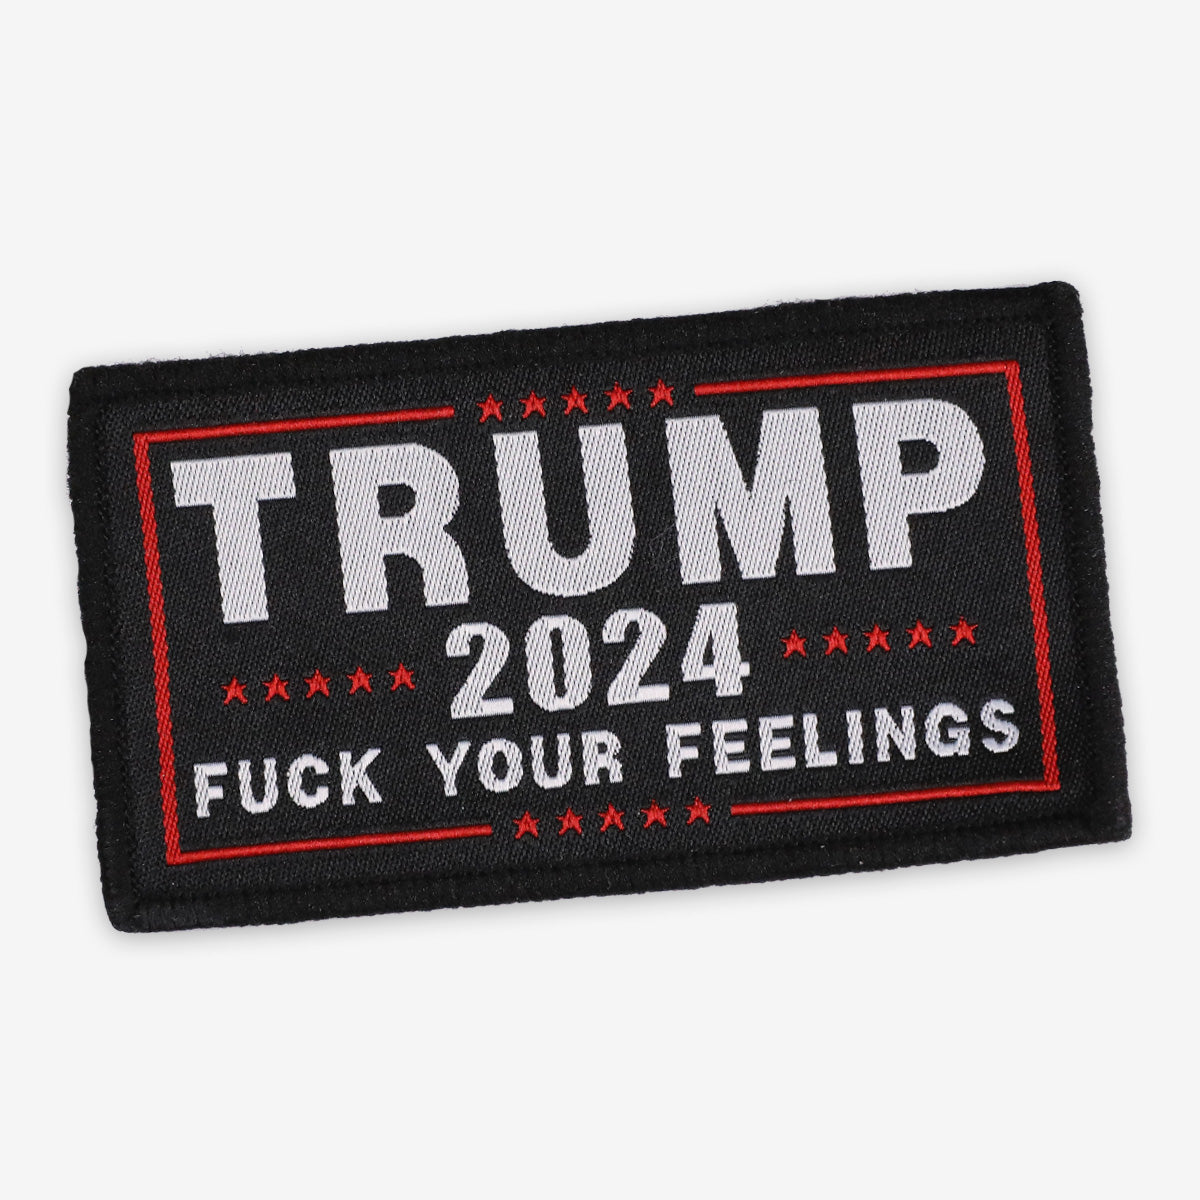 Trump 2024 Patch - F Your Feelings